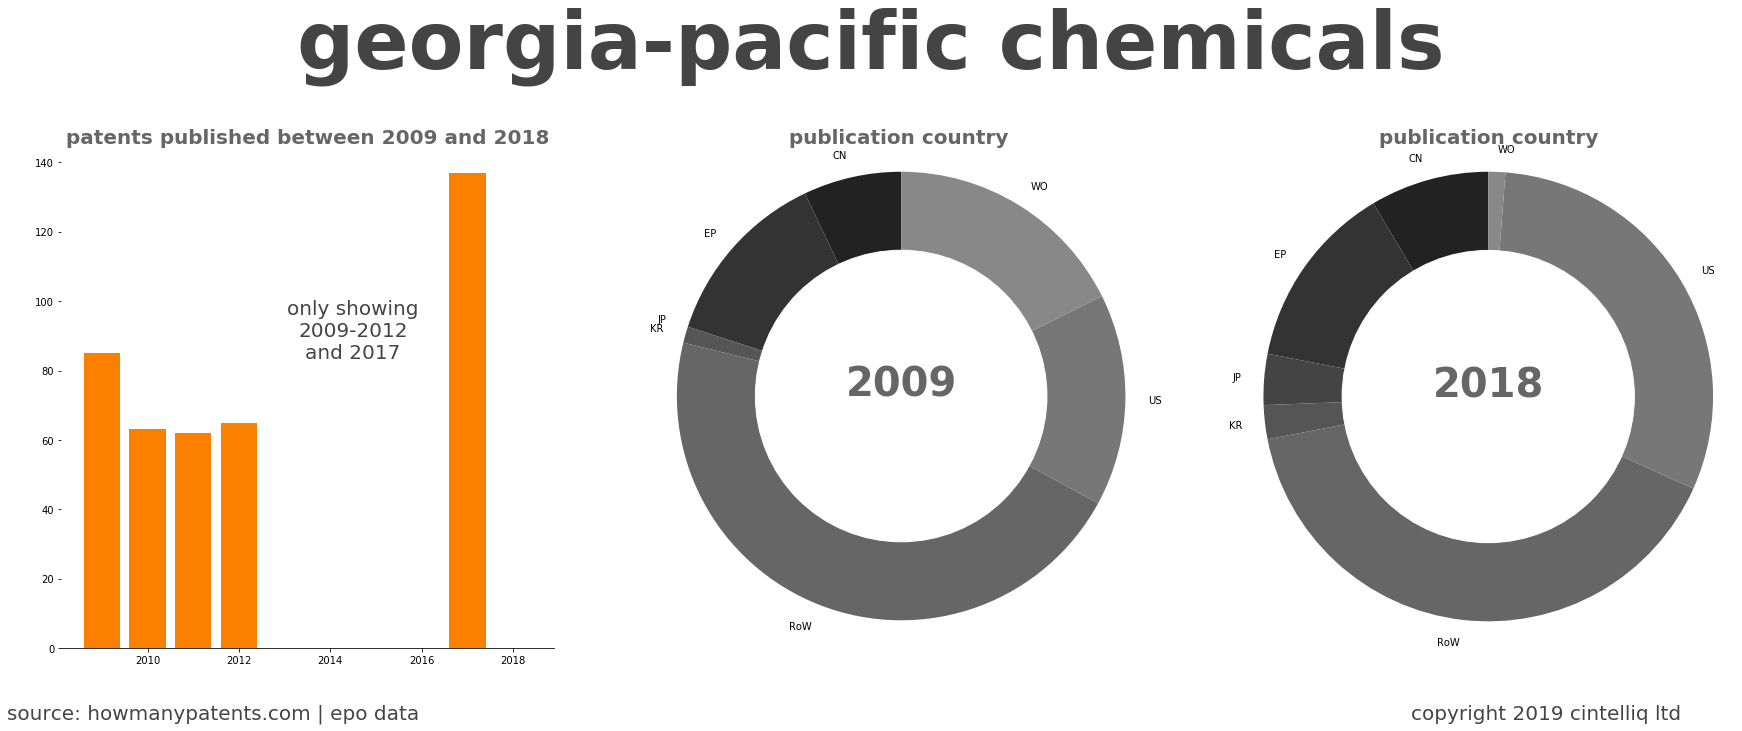 summary of patents for Georgia-Pacific Chemicals